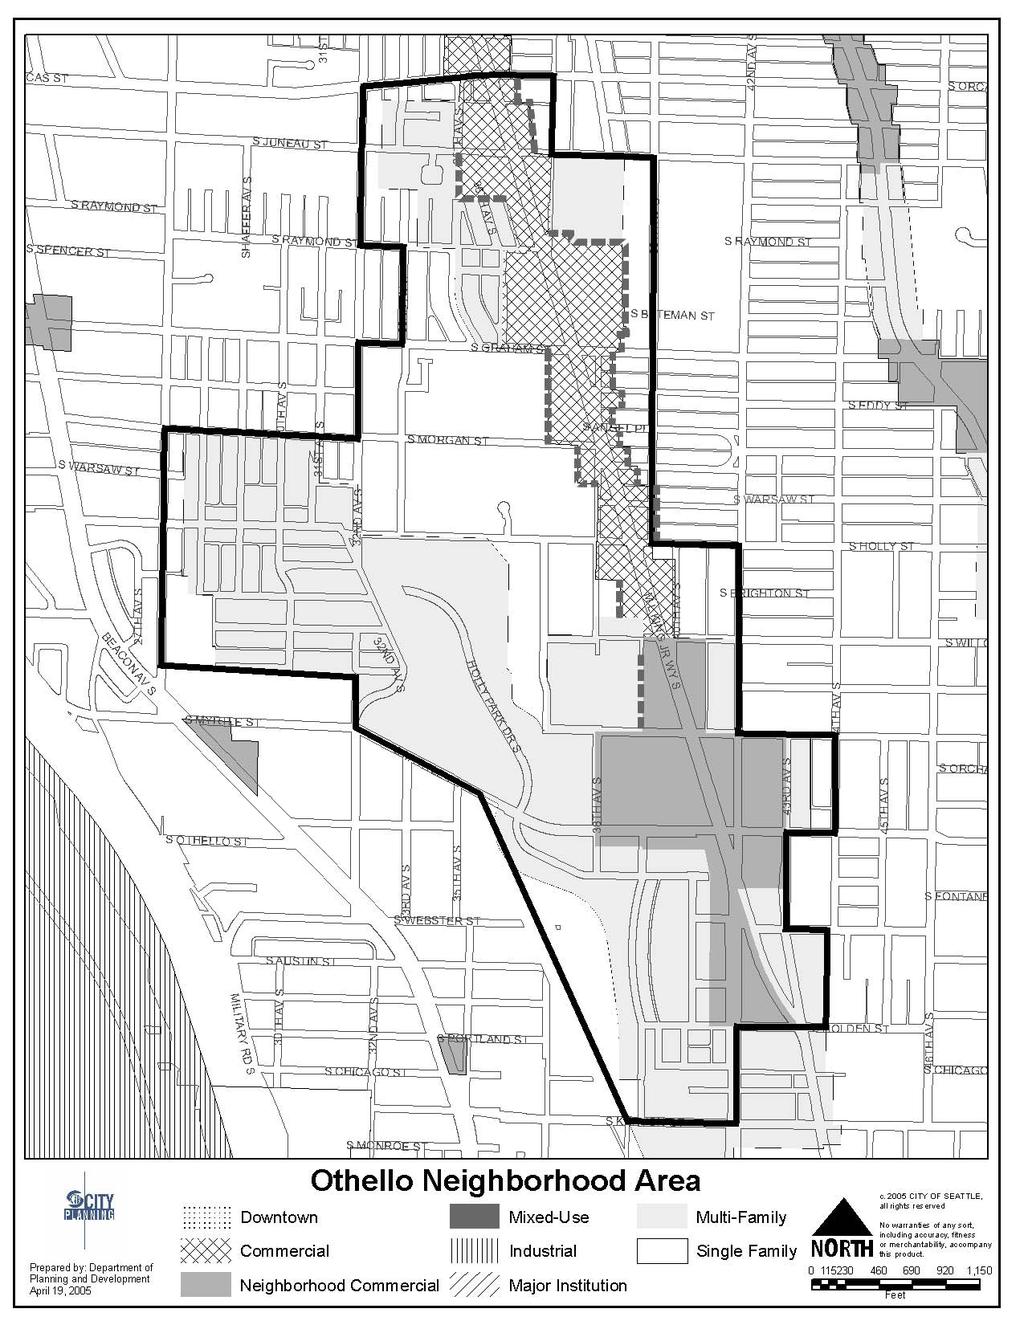 S ORCAS ST B-1 Height, Bulk and Scale Compatibility S OTHELLO ST Example areas to consider for transitions 42ND AVE S 10 Note: Design Review does not apply to all zones.